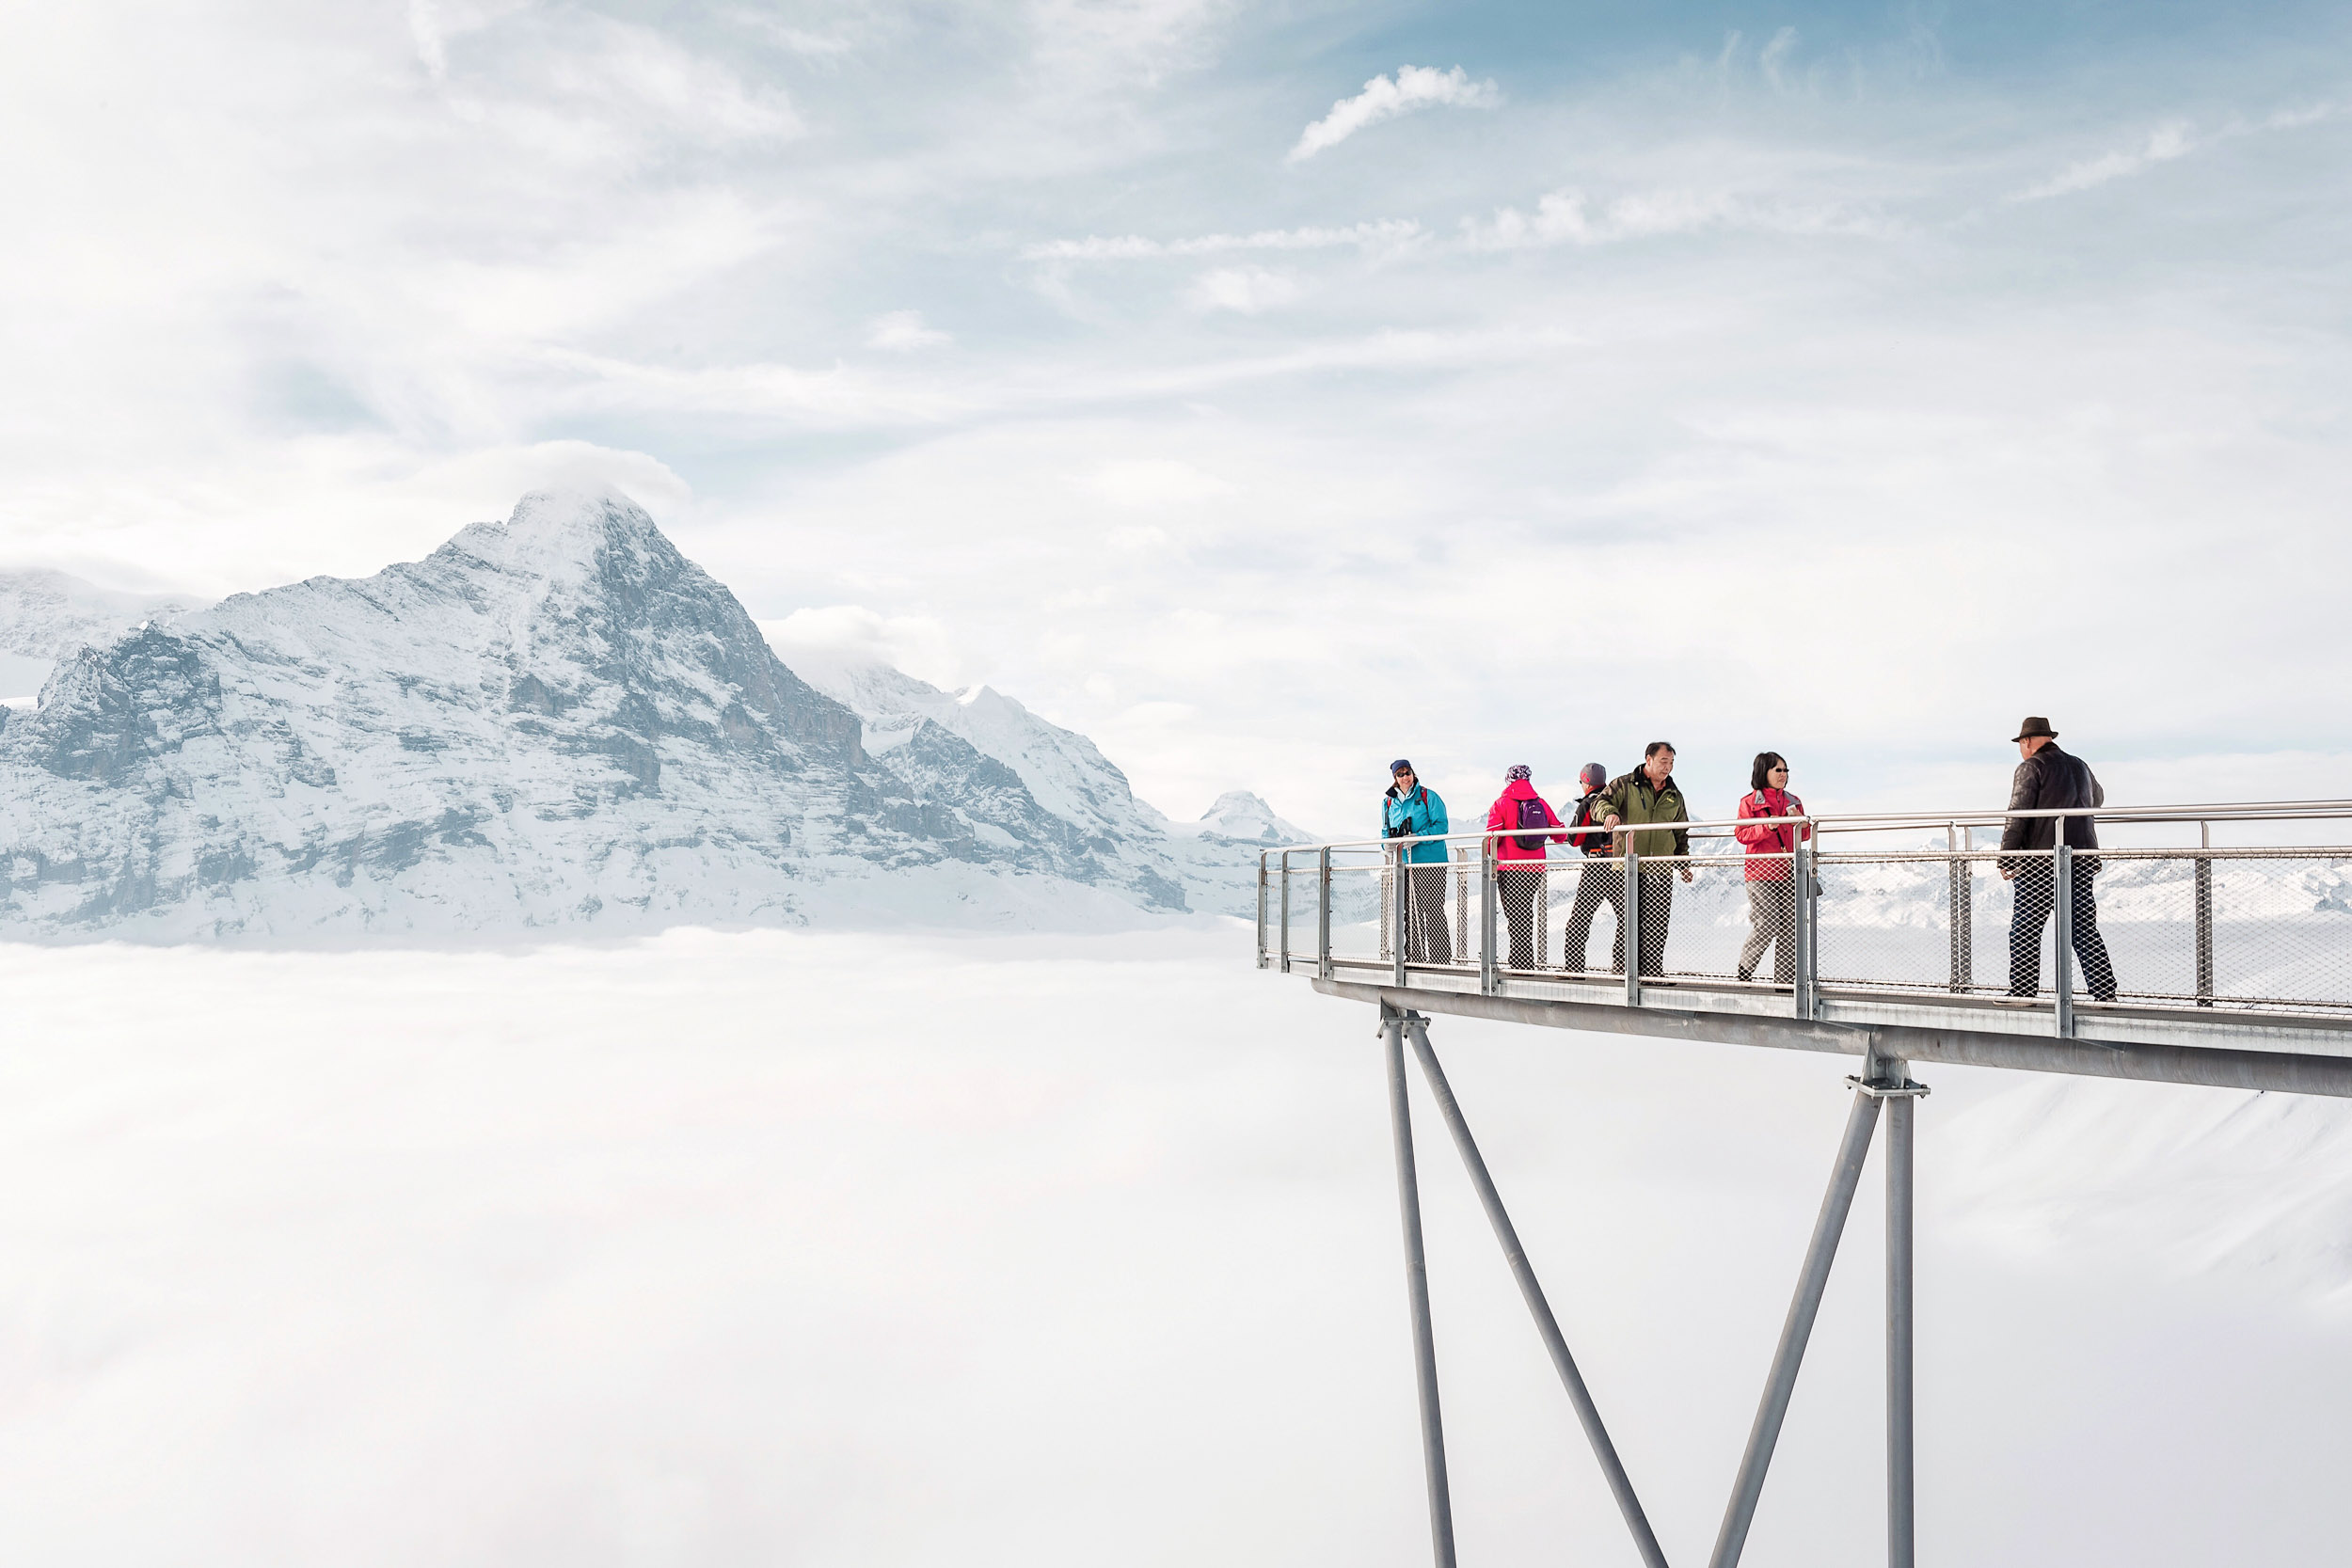 Amazing views from First Cliff Walk in Grindelwald, Switzerland. A great, easy adventure!